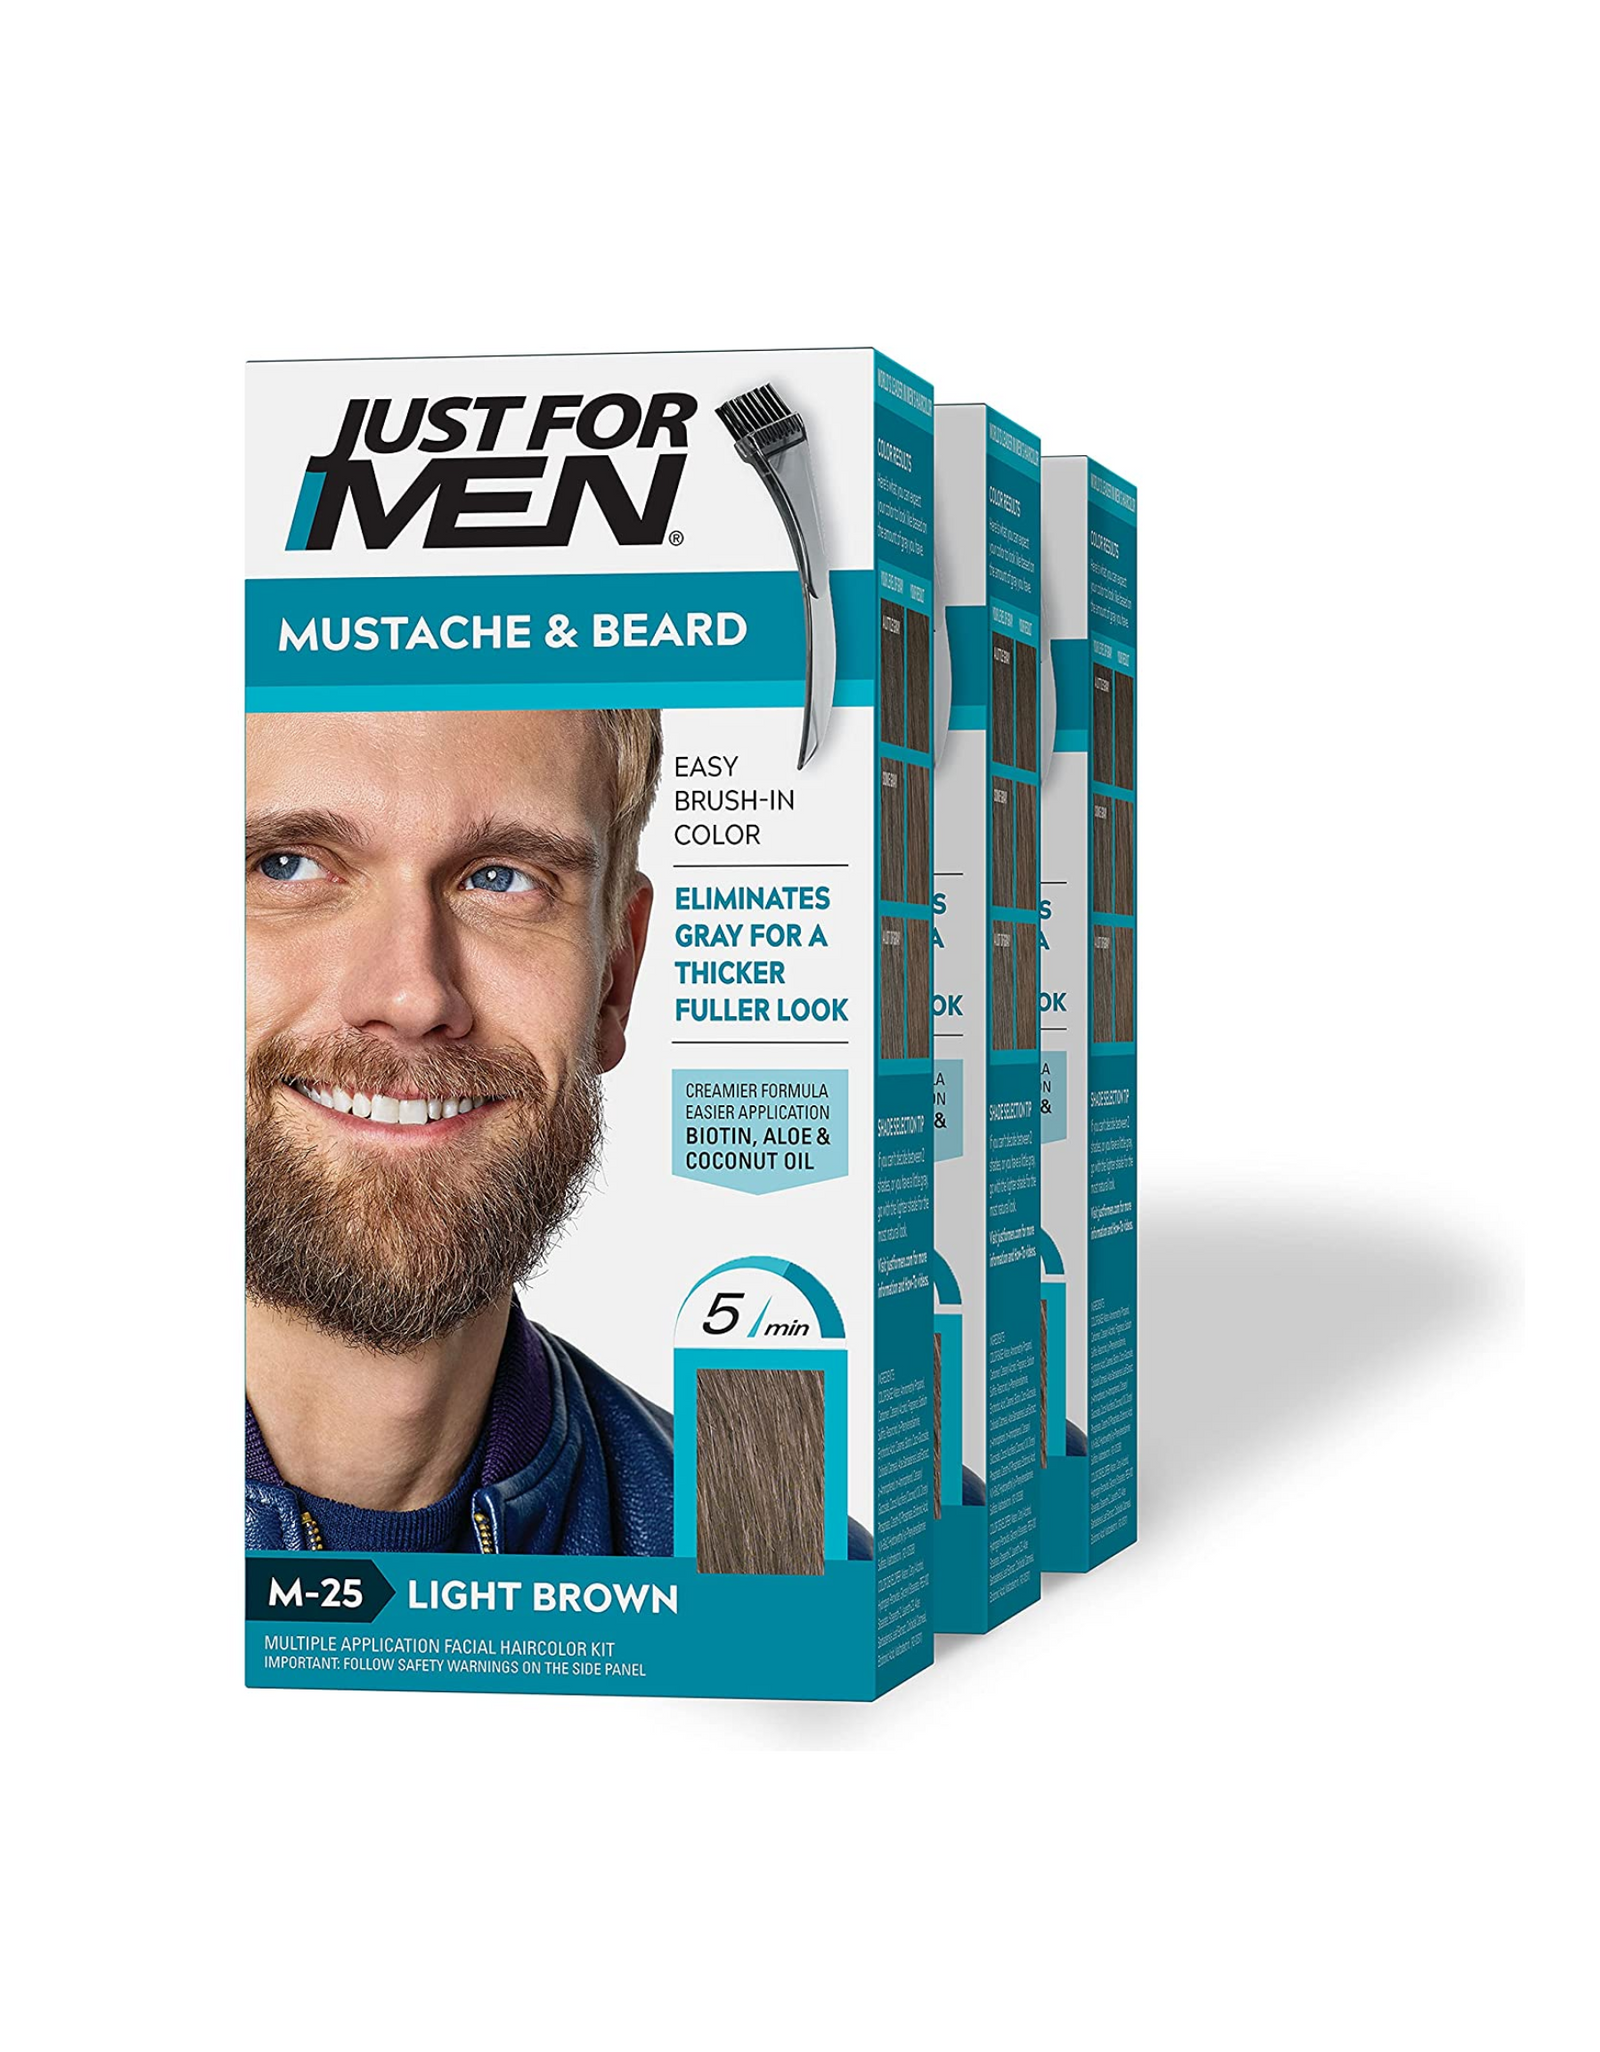 Just For Men Mustache & Beard with Brush, Light Brown, 1 Ct (Pack of 3)